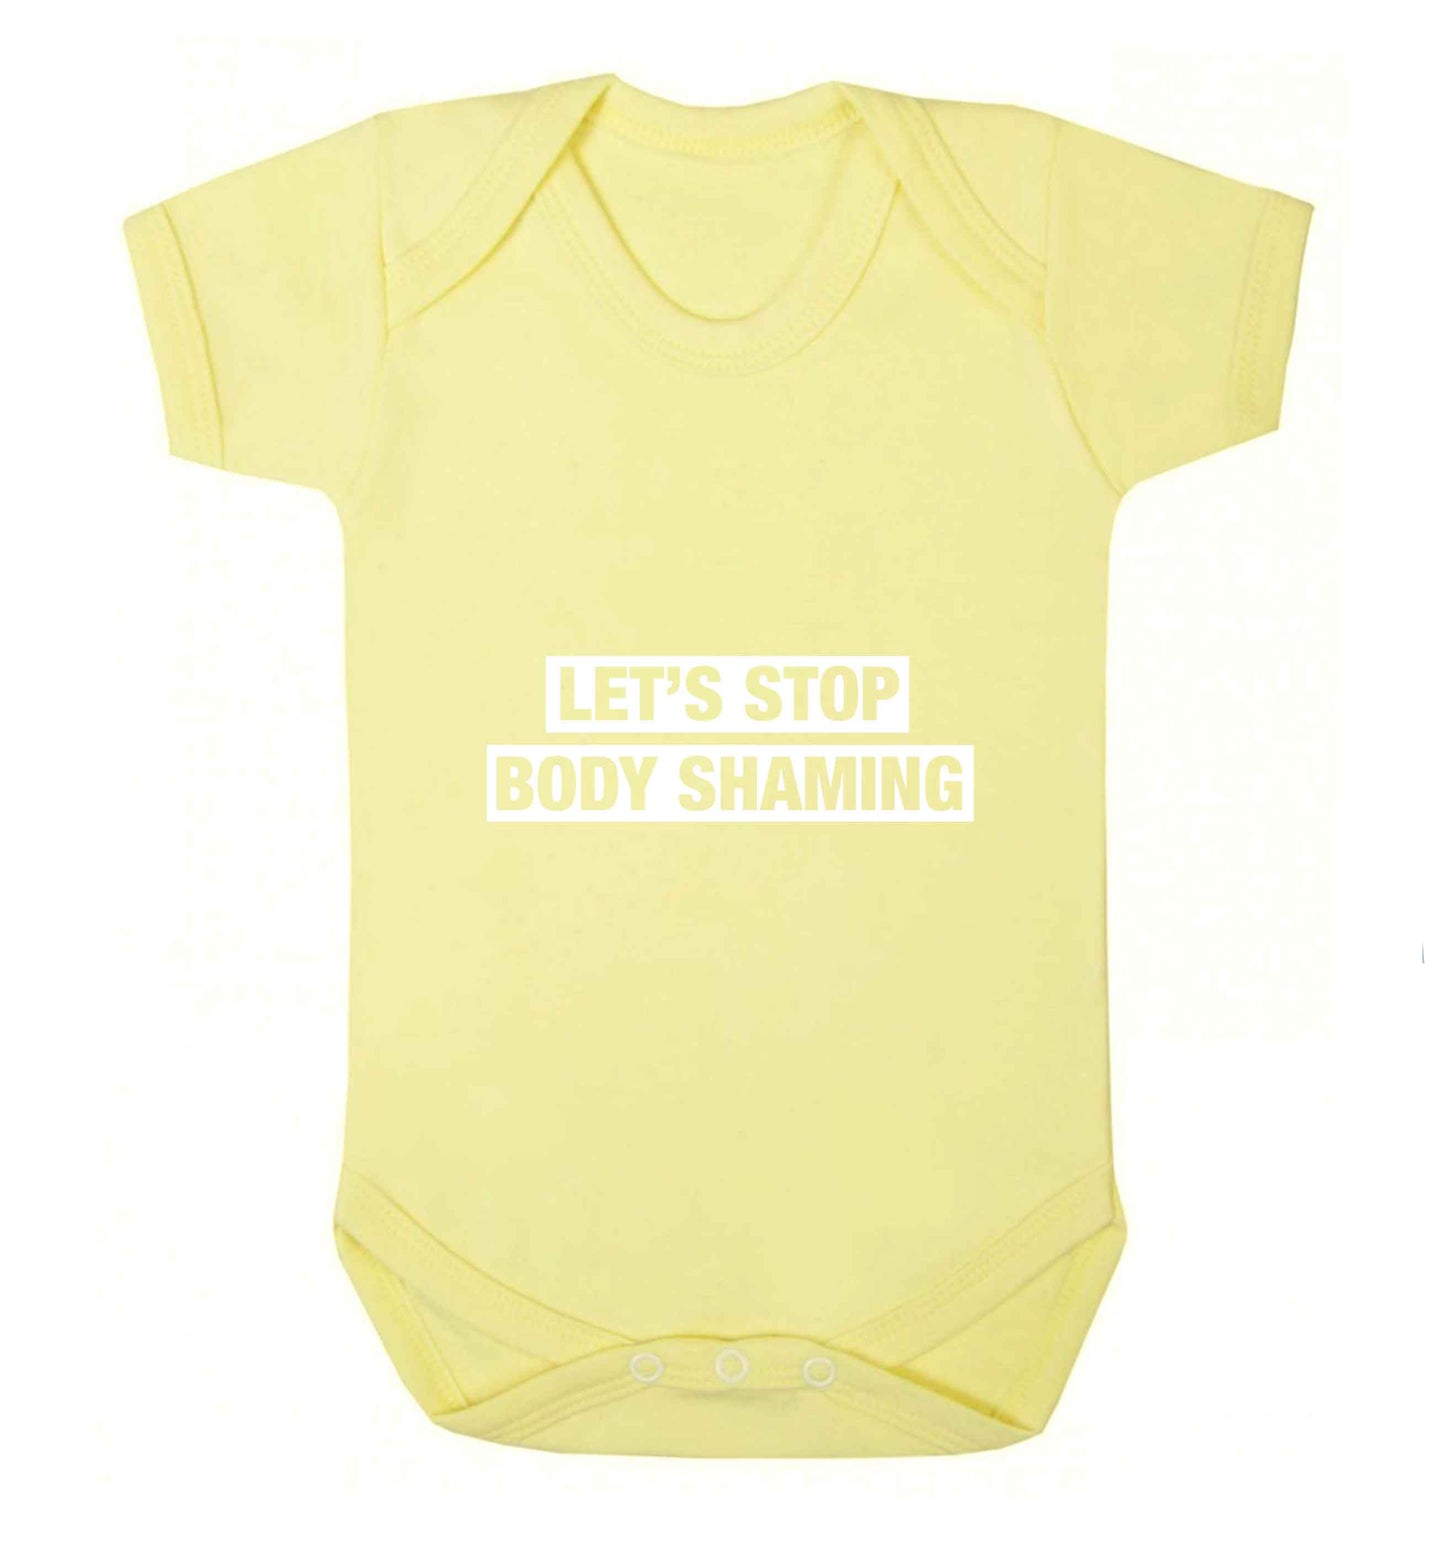 Let's stop body shaming baby vest pale yellow 18-24 months